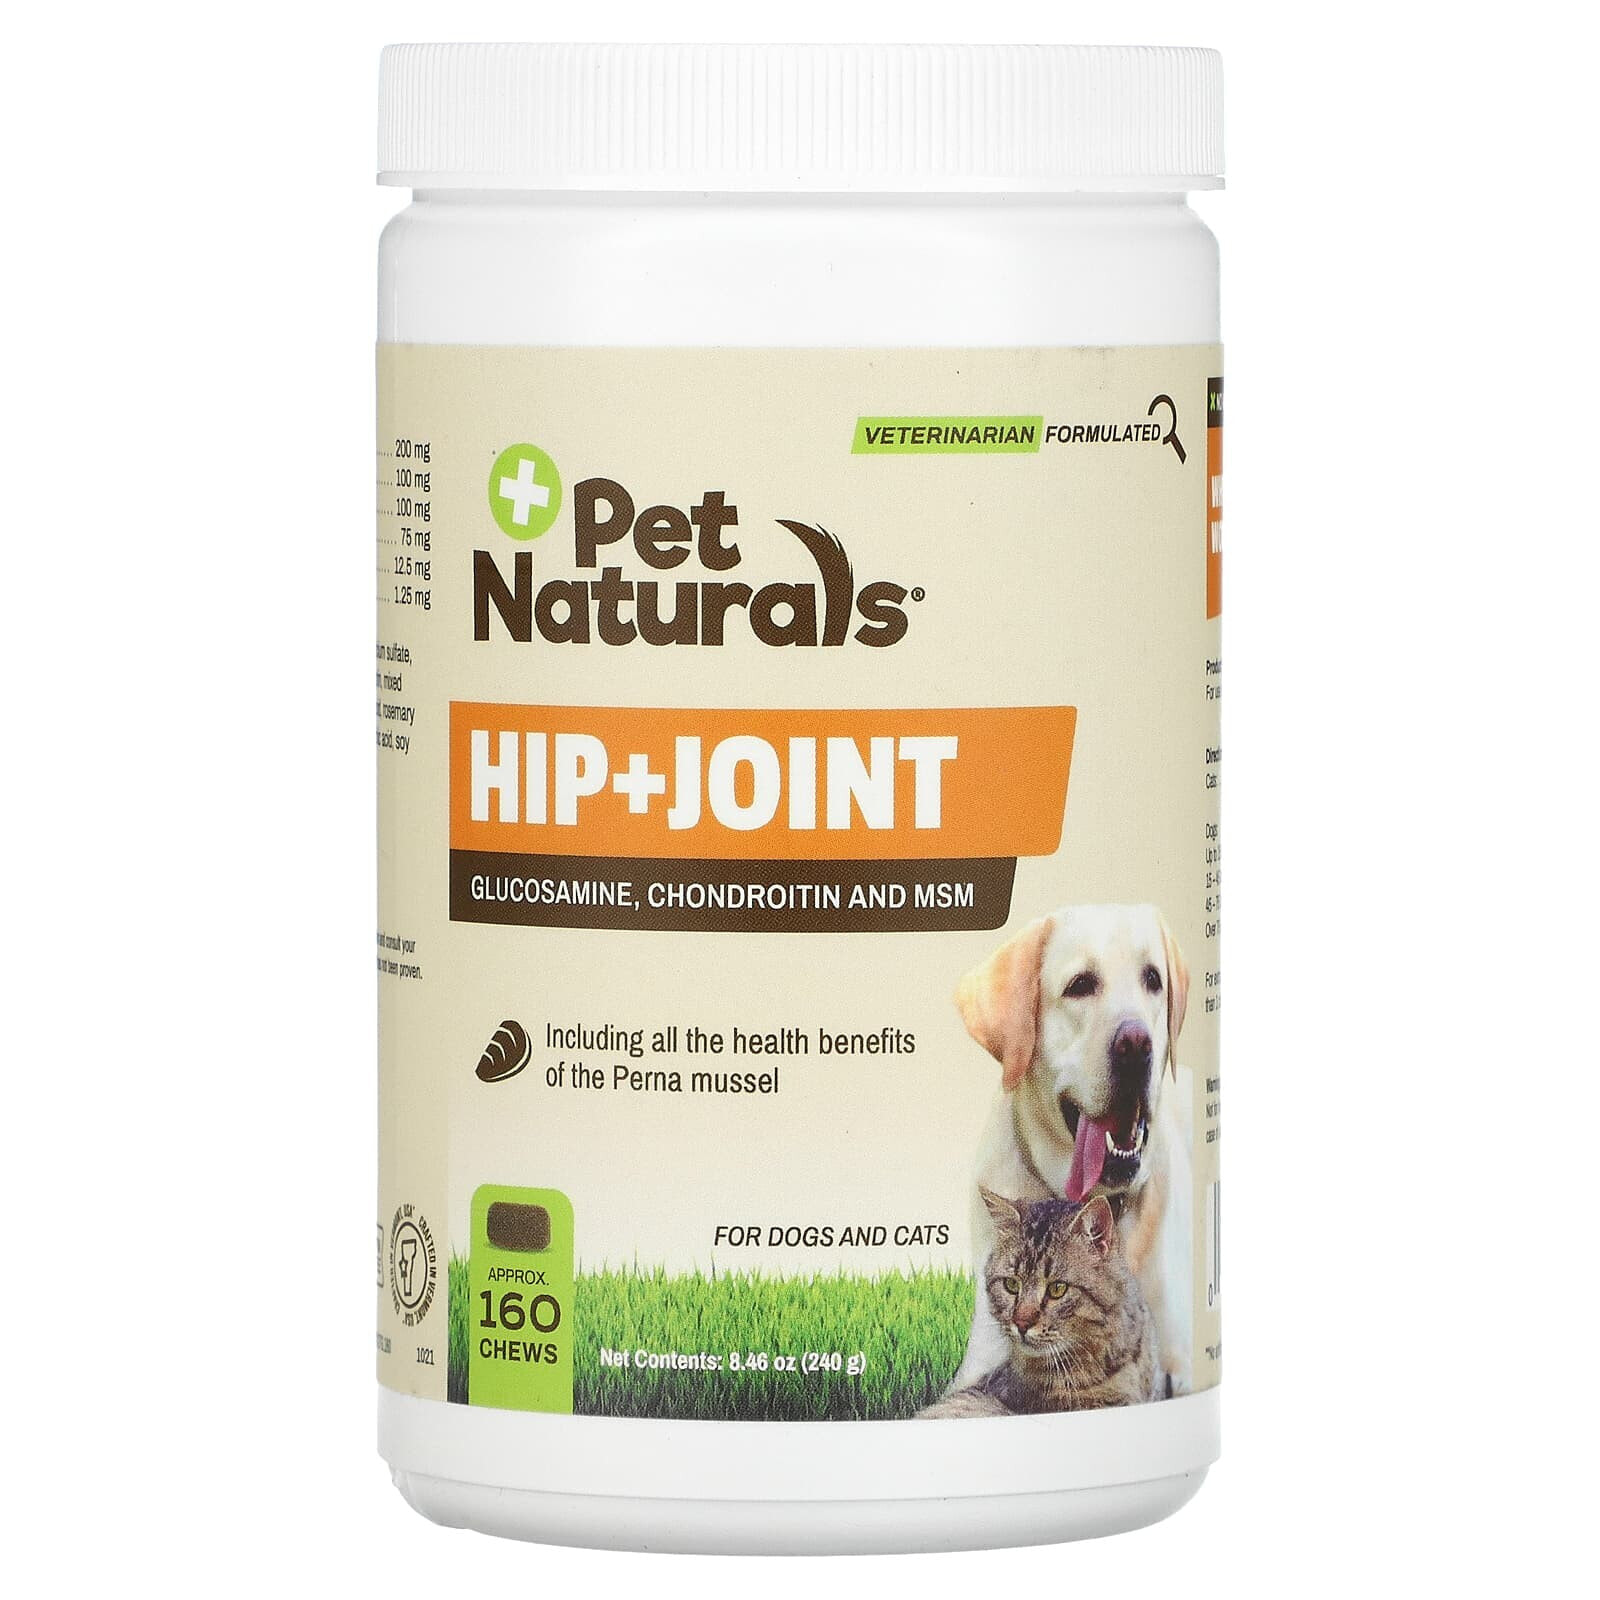 Hip + Joint, For Dogs and Cats, 160 Chews, 8.46 oz (240 g)